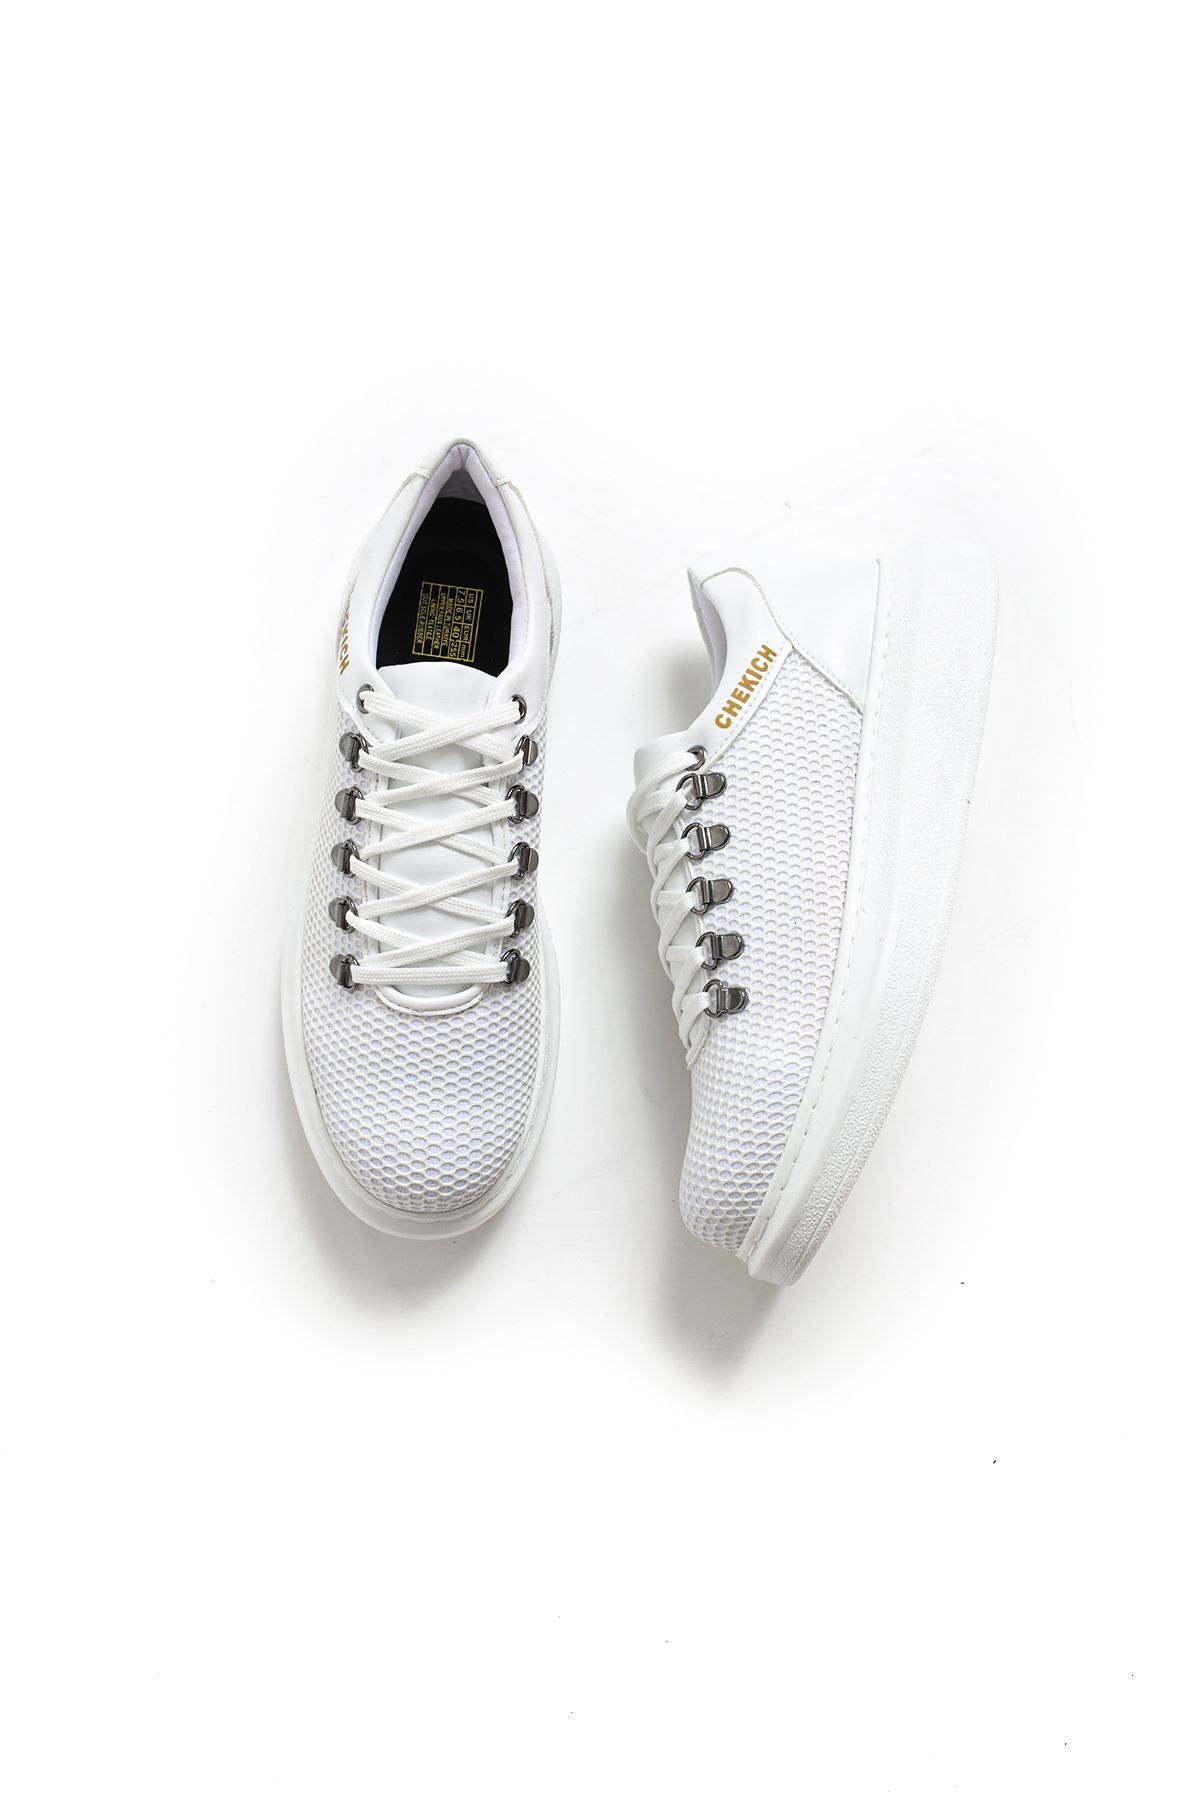 CH021 Men's Unisex Full White Honeycomb Processing Casual Sneaker Sports Shoes - STREETMODE ™